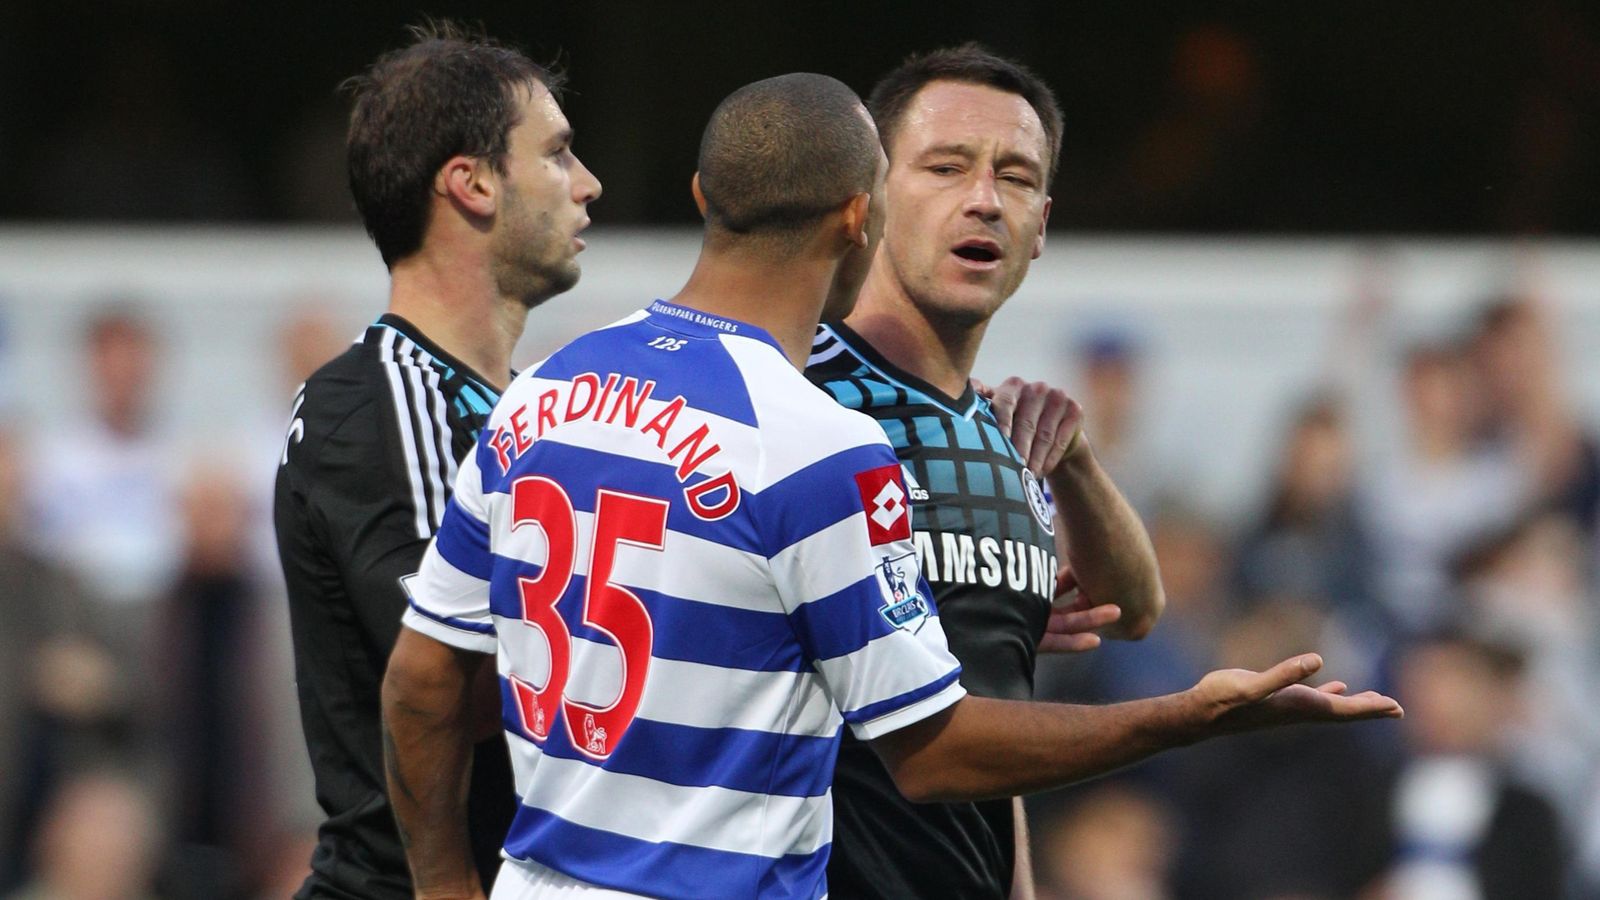 Anton Ferdinand: Racism consequences worse for victims than perpetrators